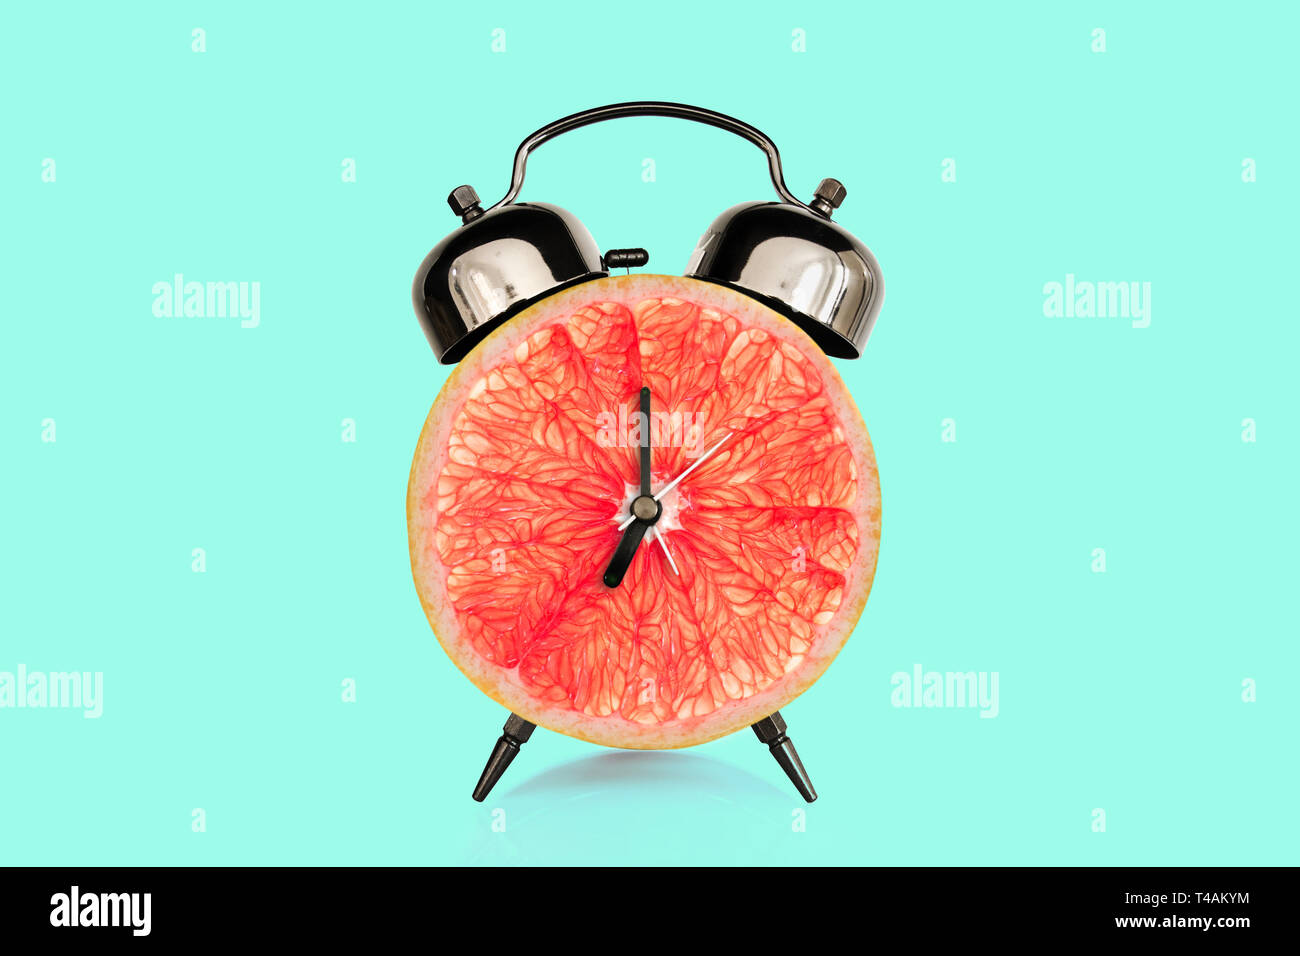 Grapefruit slice on alarm clock, blue pastel background. fruit and vitamins diet at breakfast nutrition concept Stock Photo